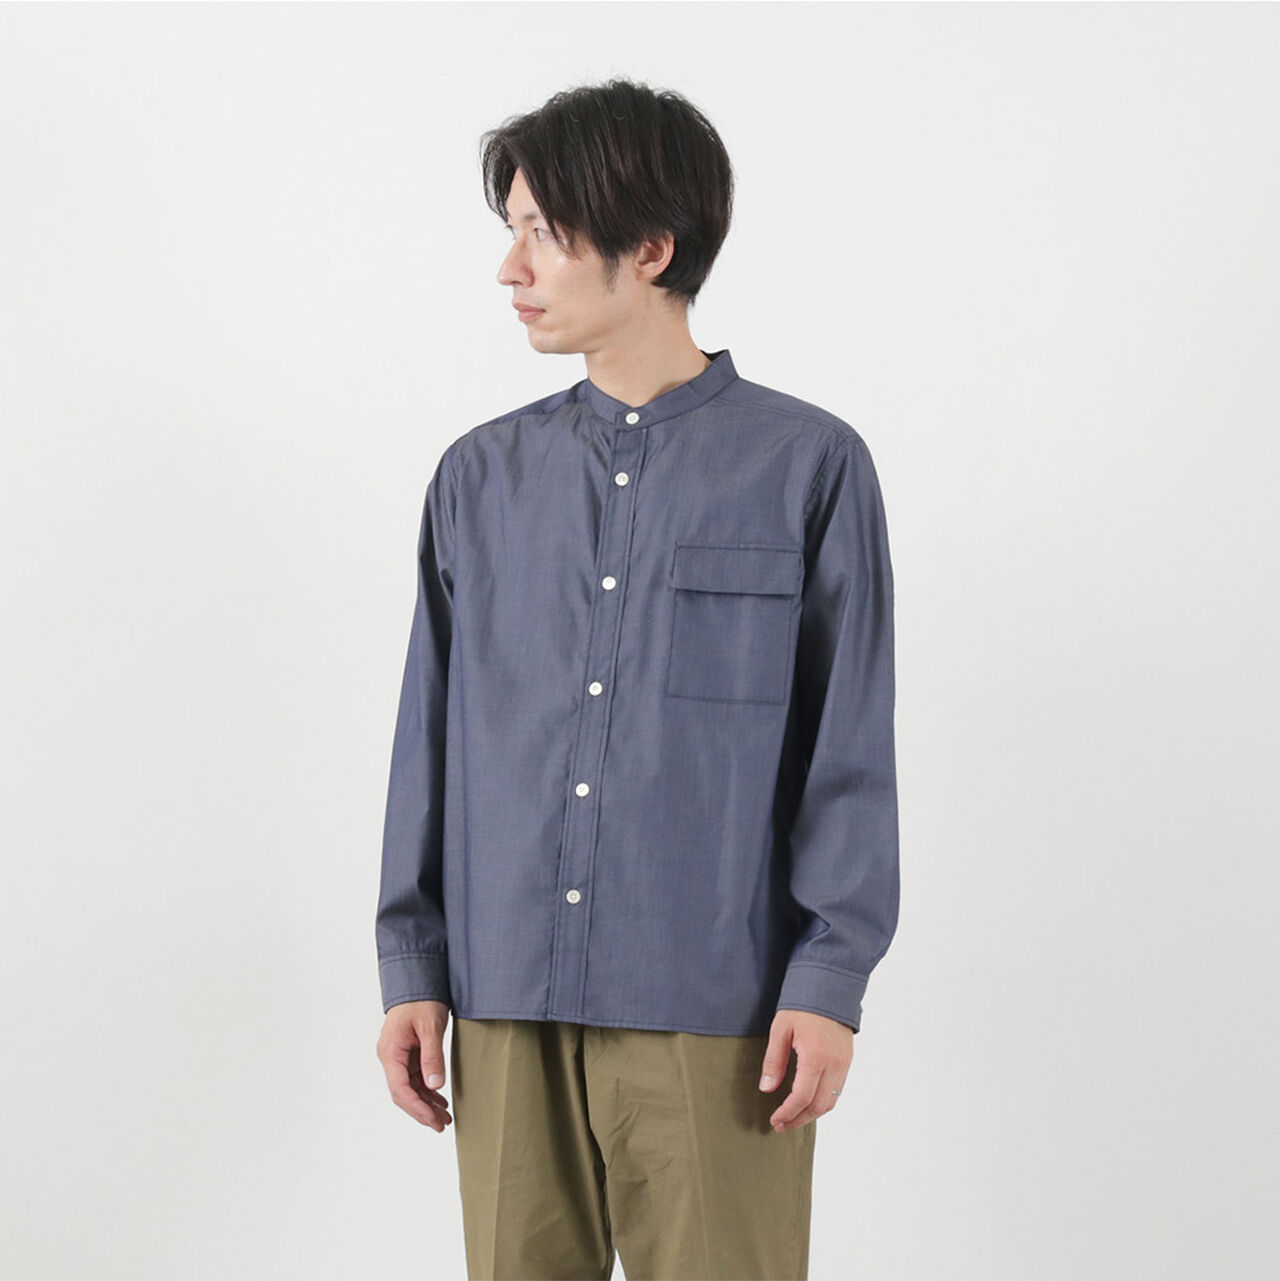 200 twin yarn chambray twill CPO shirt,, large image number 10